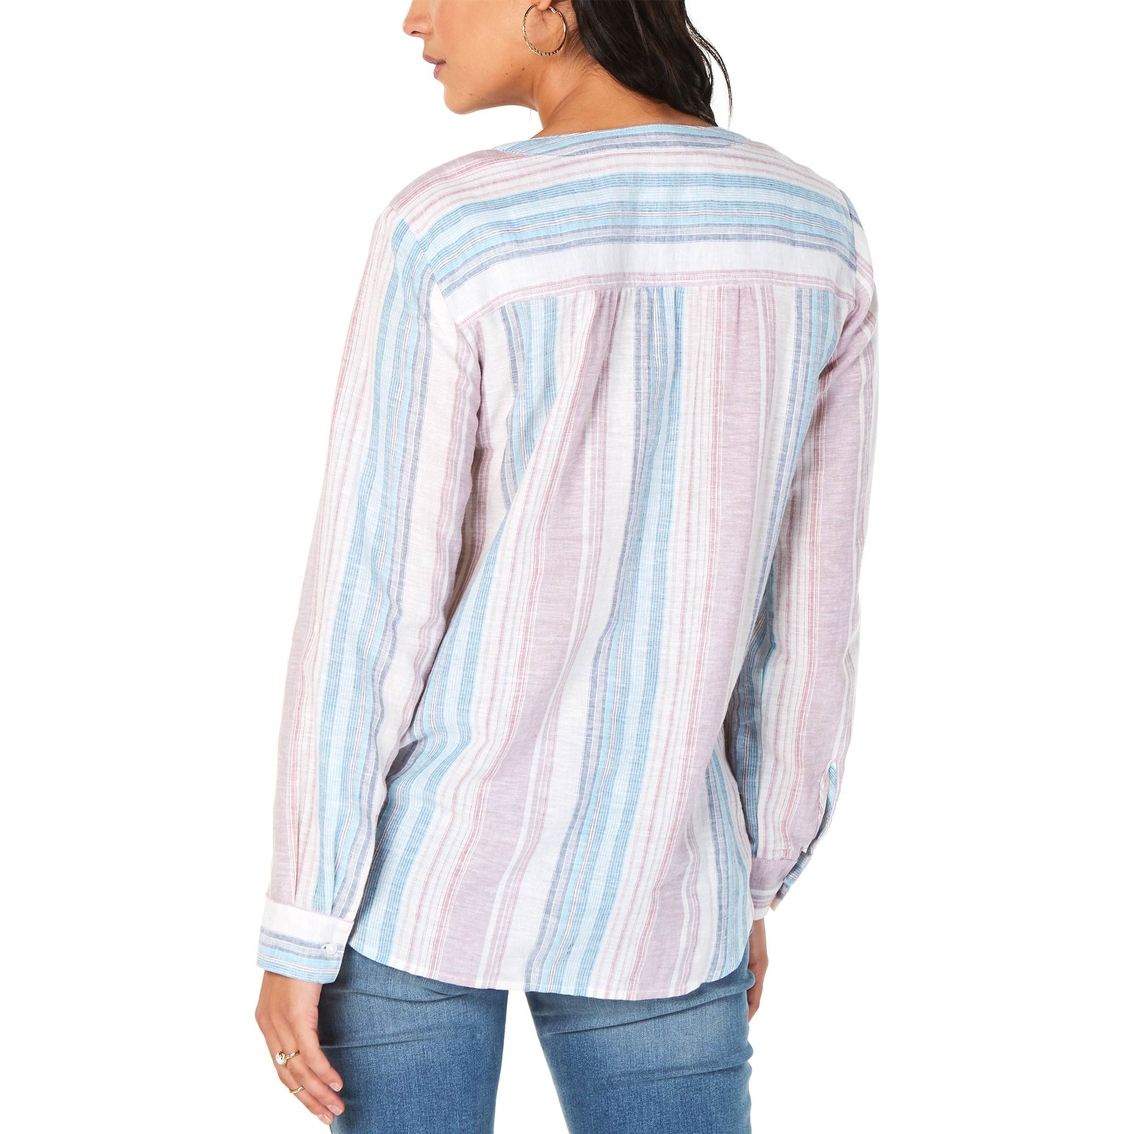 Style & Co. Petite Striped Roll Tab Top - Image 2 of 2